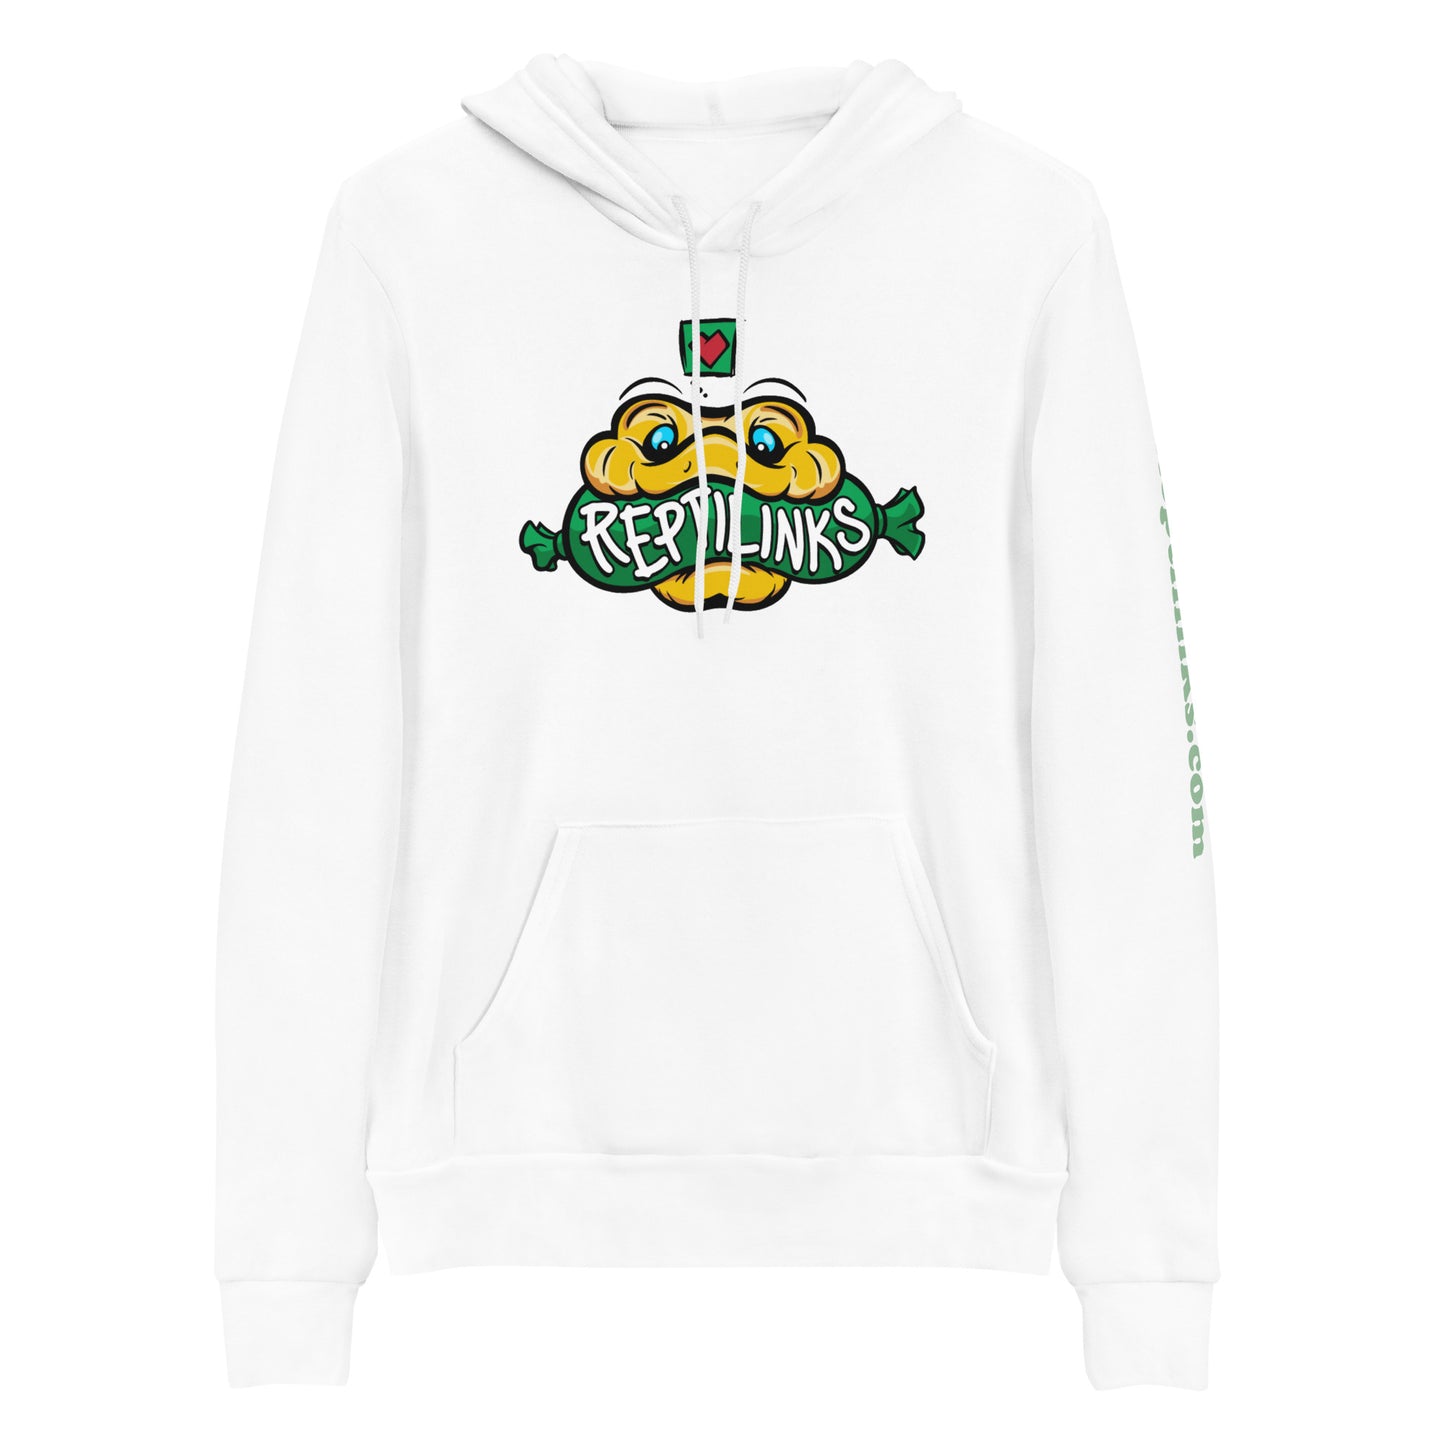 "I Heart Reptilinks" Limited Edition Unisex Hoodie